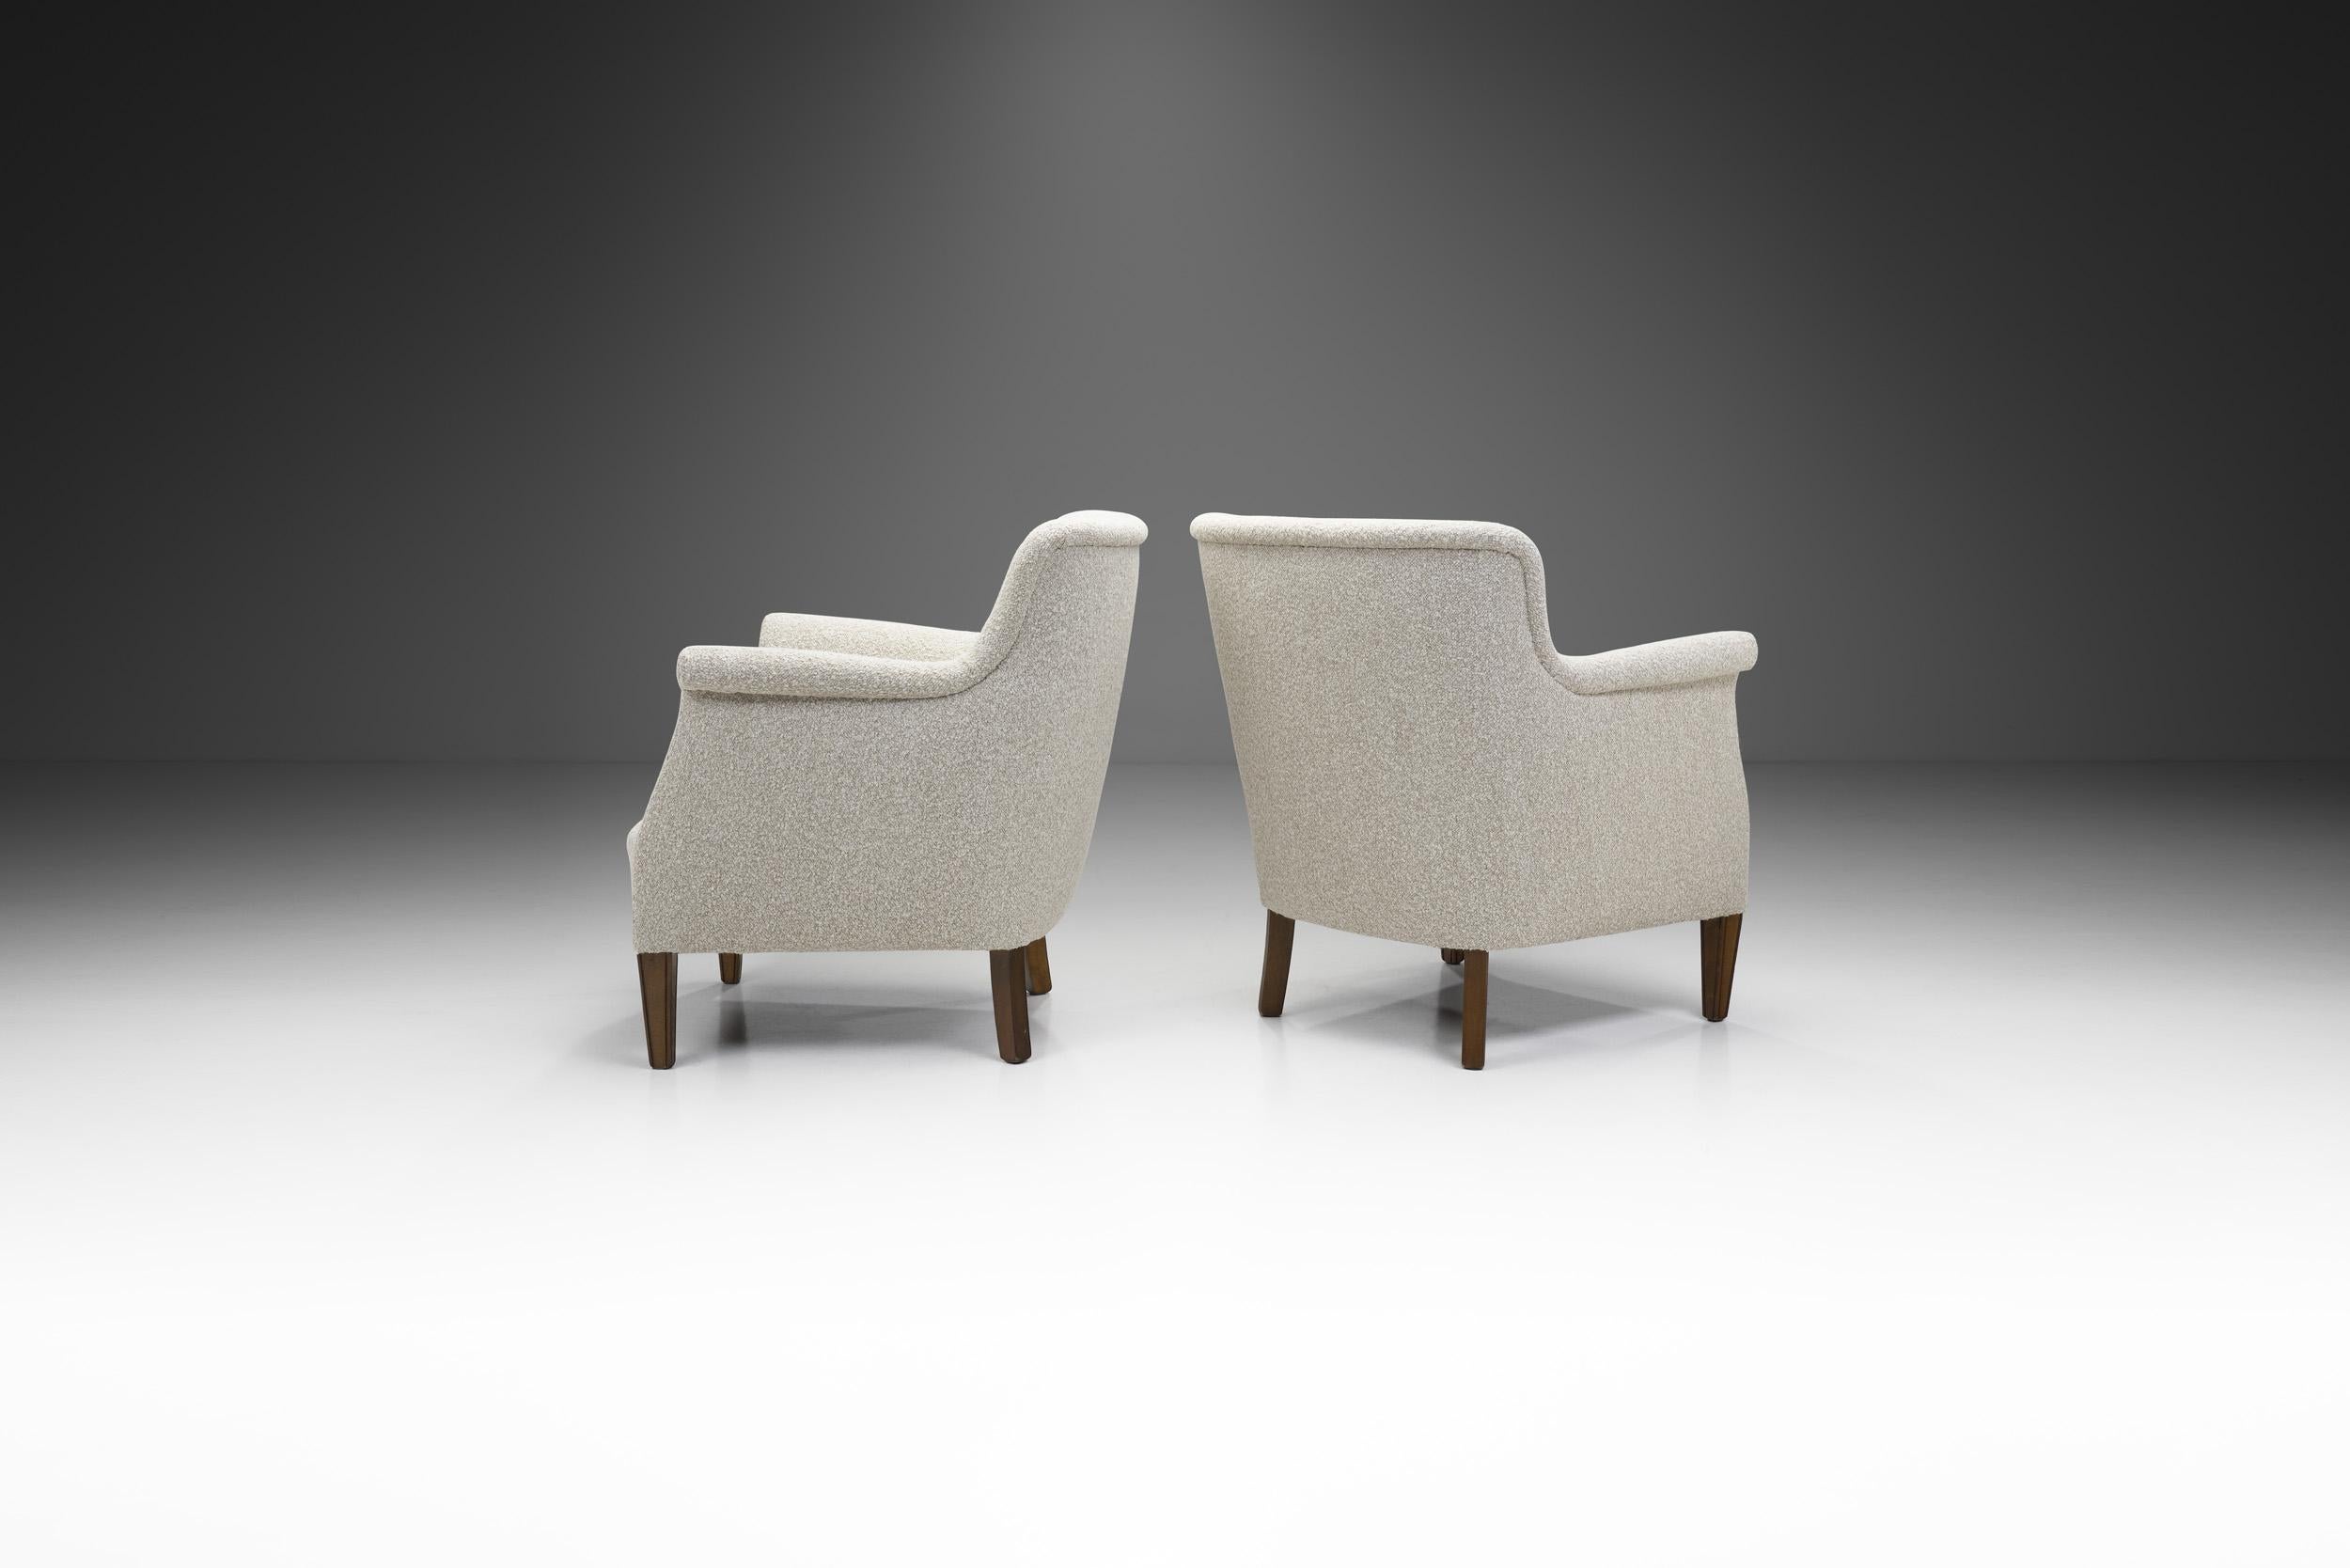 20th Century Pair of Danish Upholstered Easy Chairs with Beech Legs, Denmark 1940s For Sale